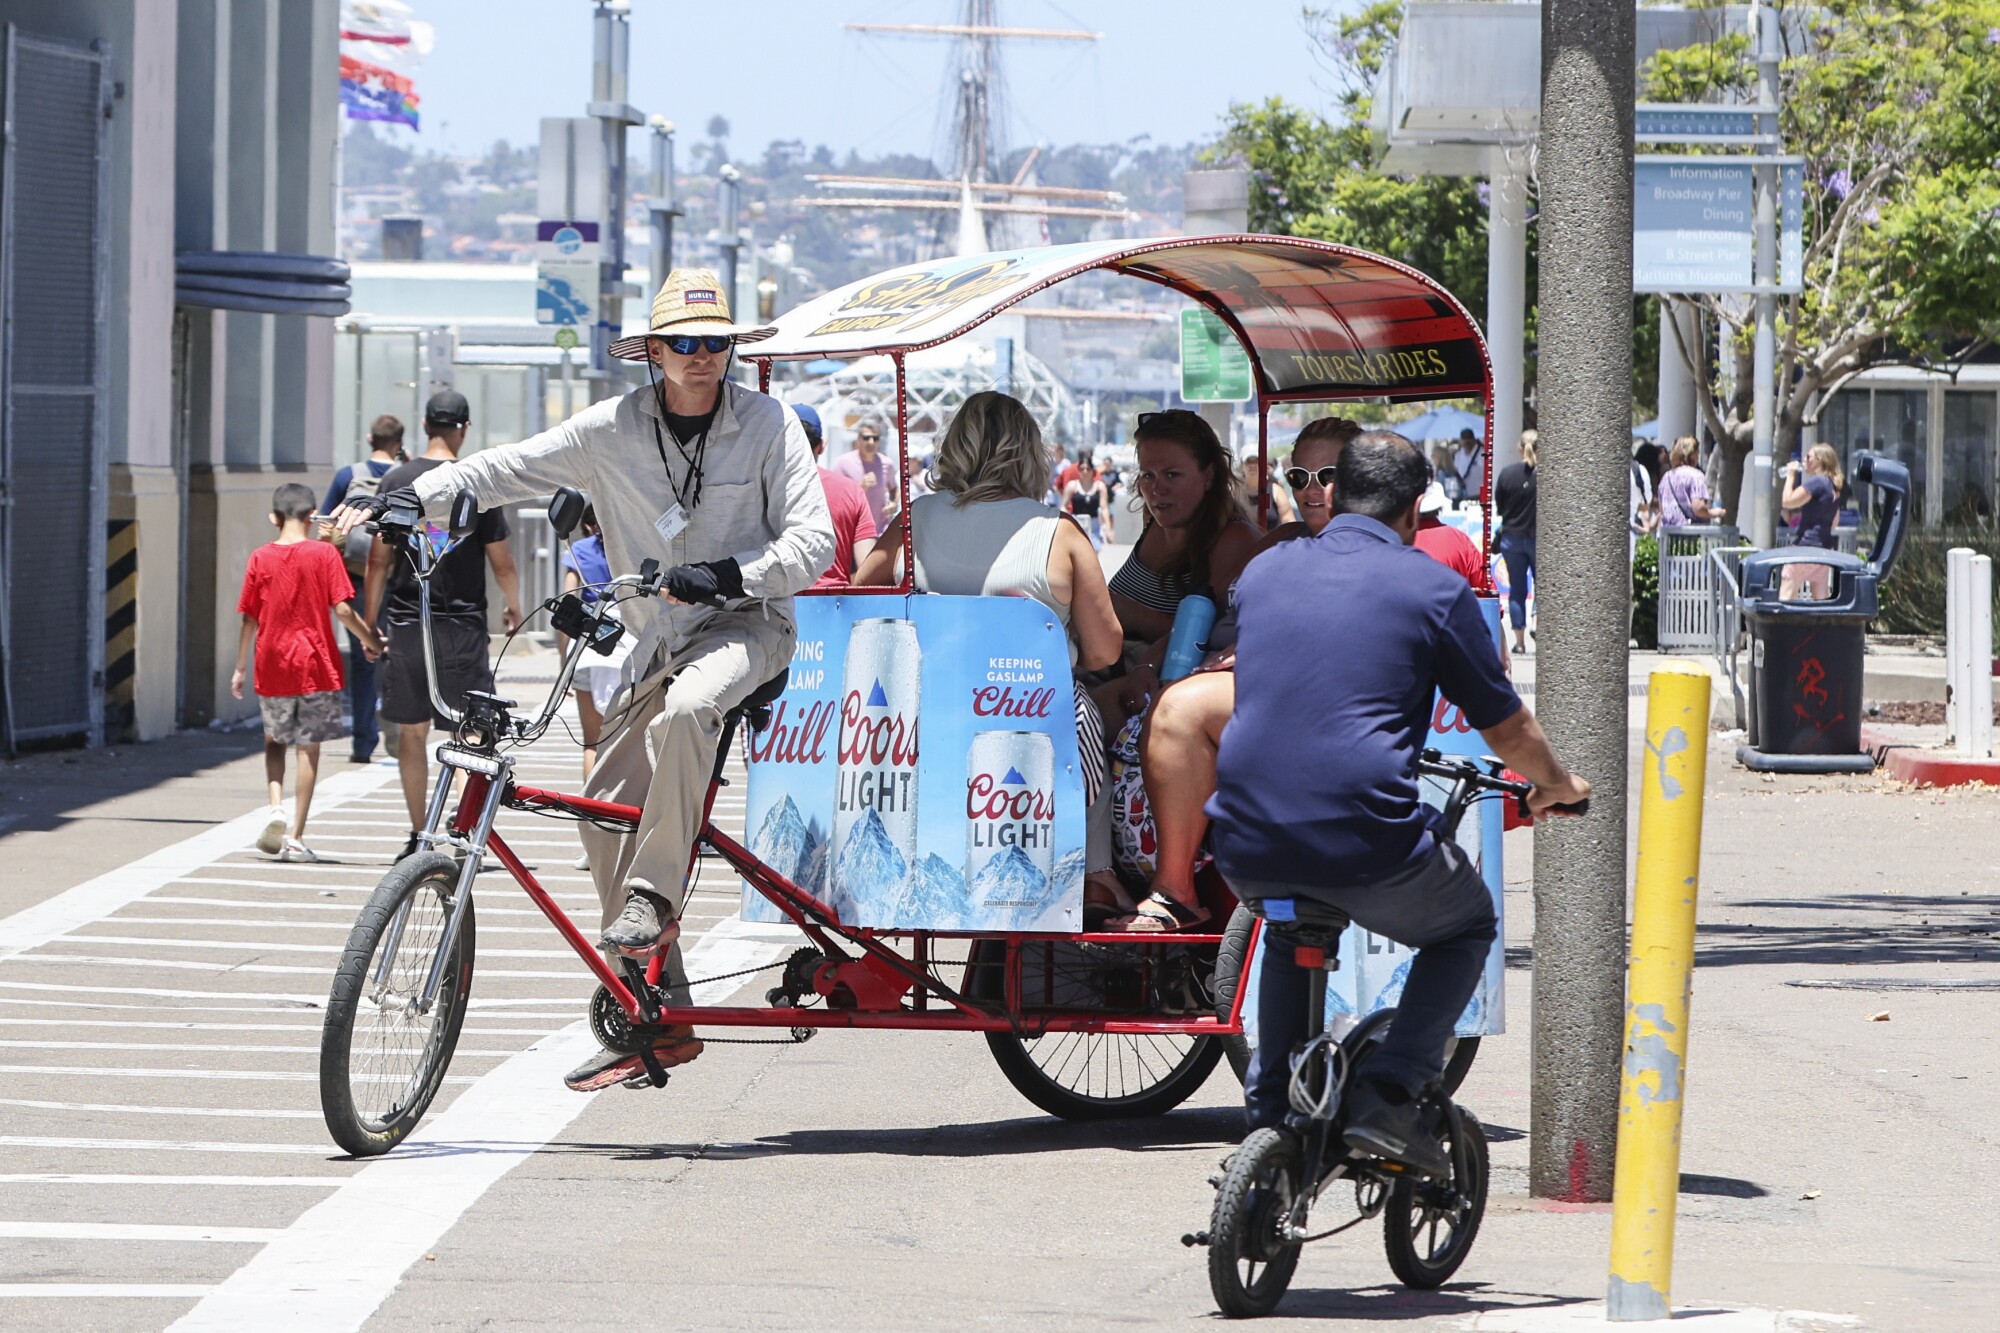 With a power assist Pedicab, a driver negotiates traffic after picking up riders by the USS Midway Museum.